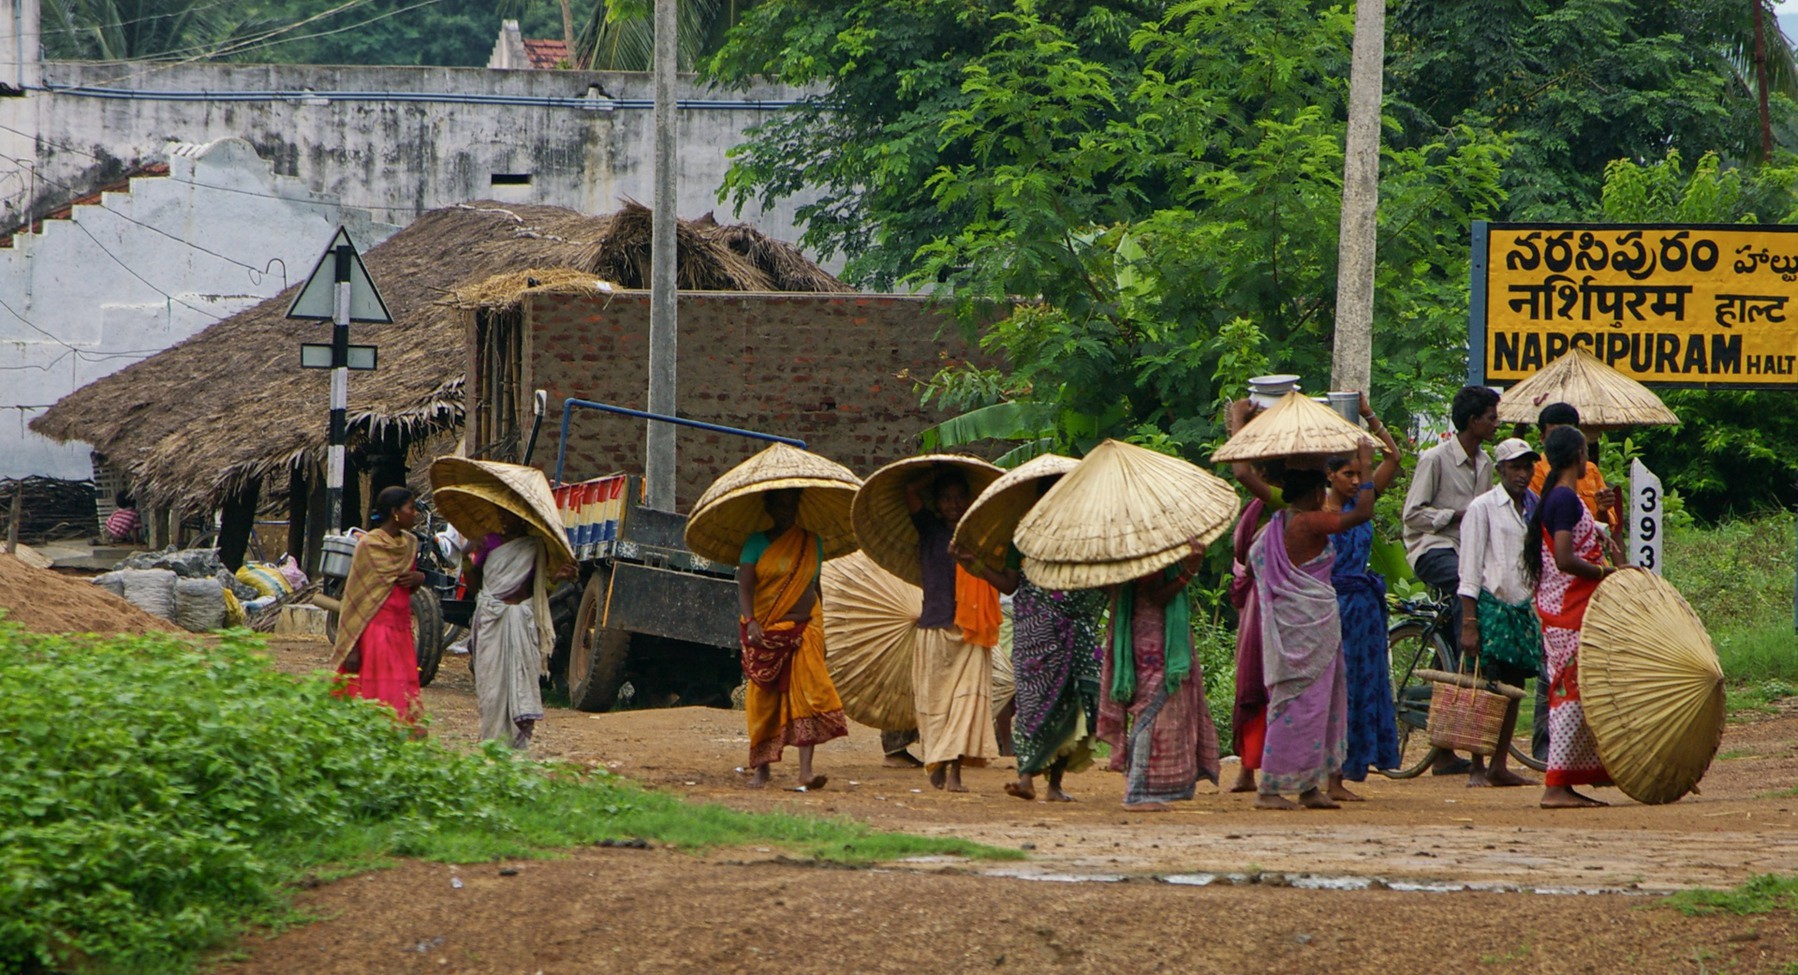 Farmers with traditional headgear